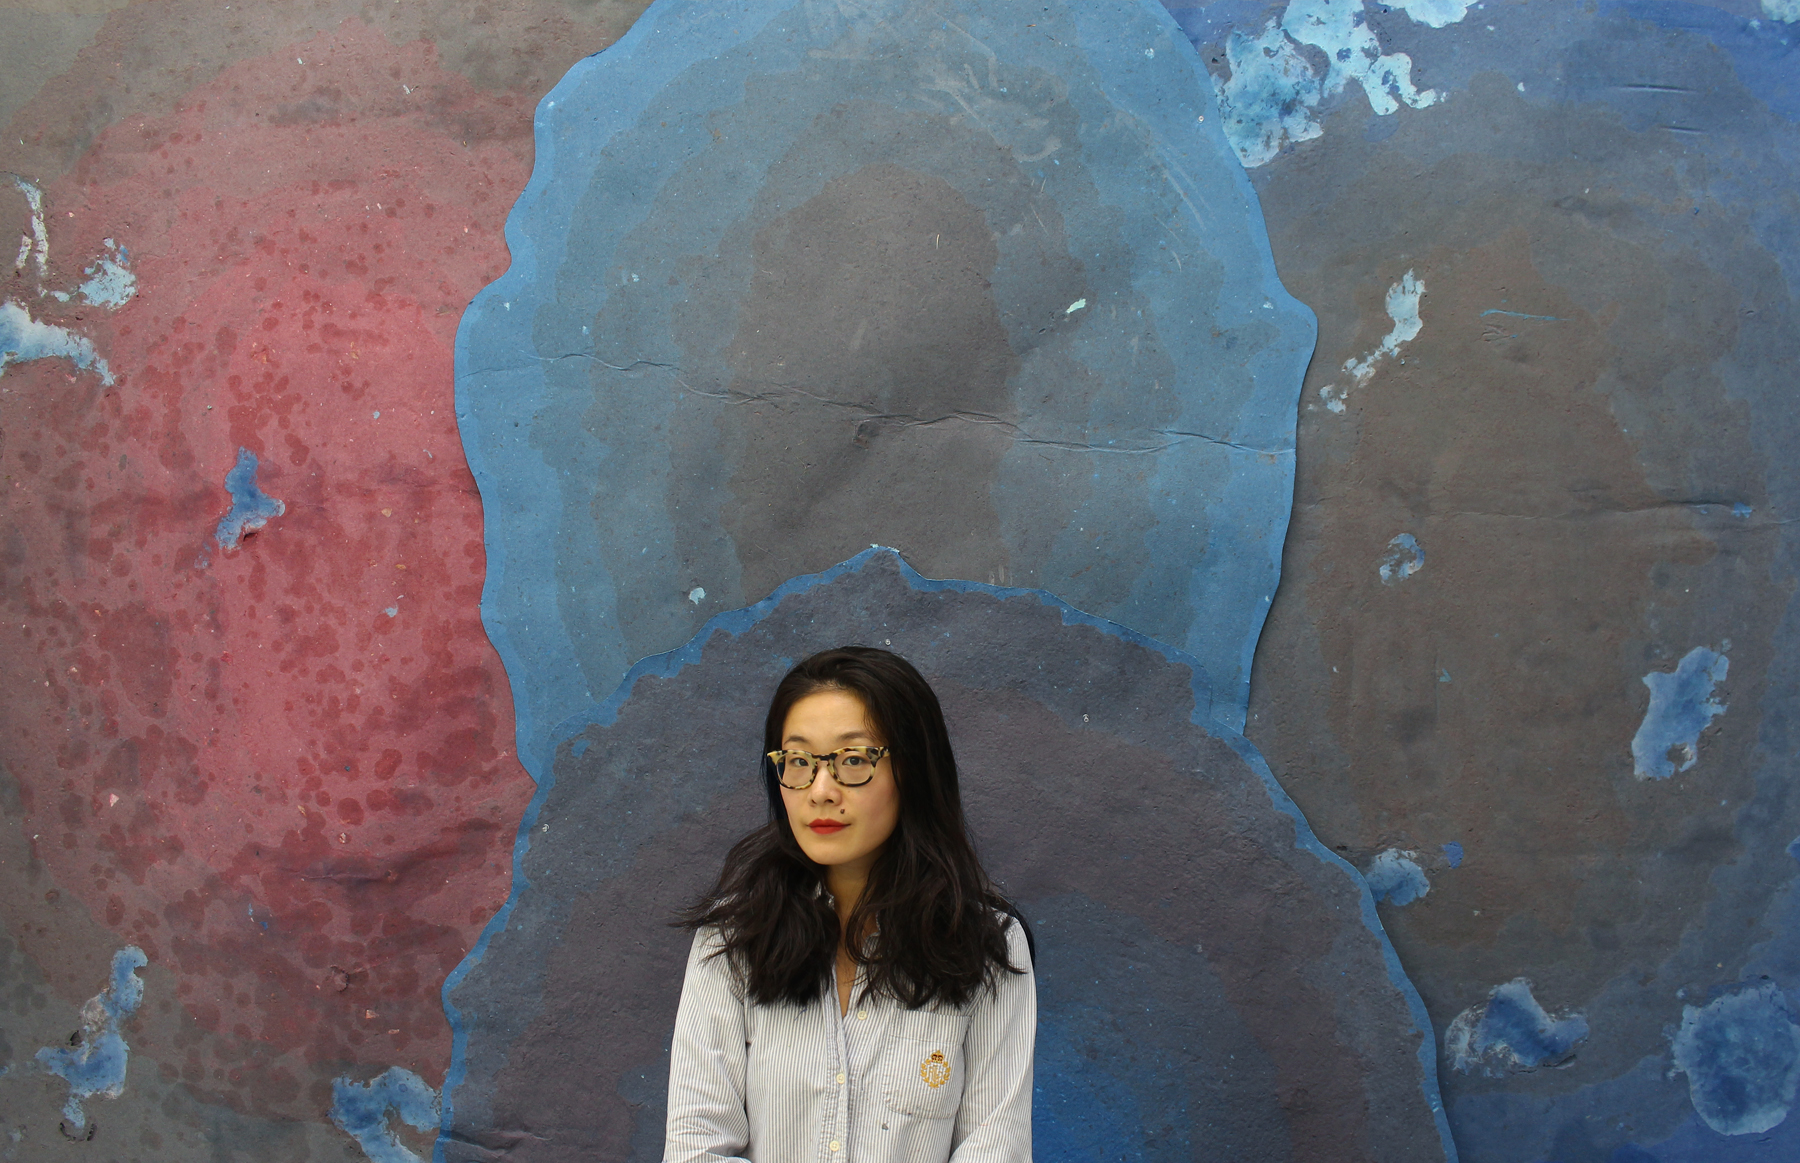 A woman stands before a painting displaying various shades of blue.